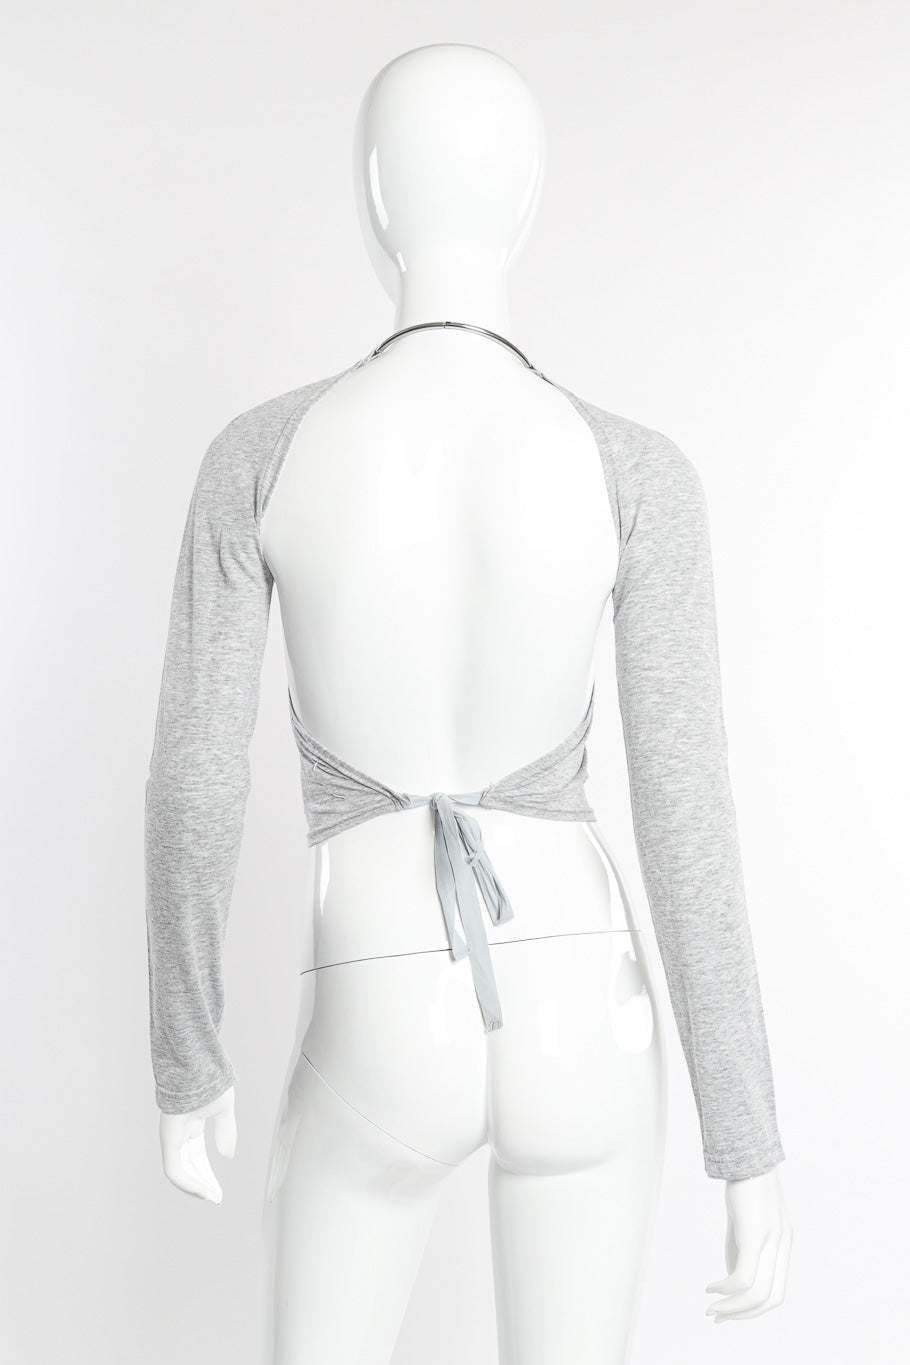 Cut-Out Sleeve Ring Collar Halter Top by Margiela on mannequin back @recessla